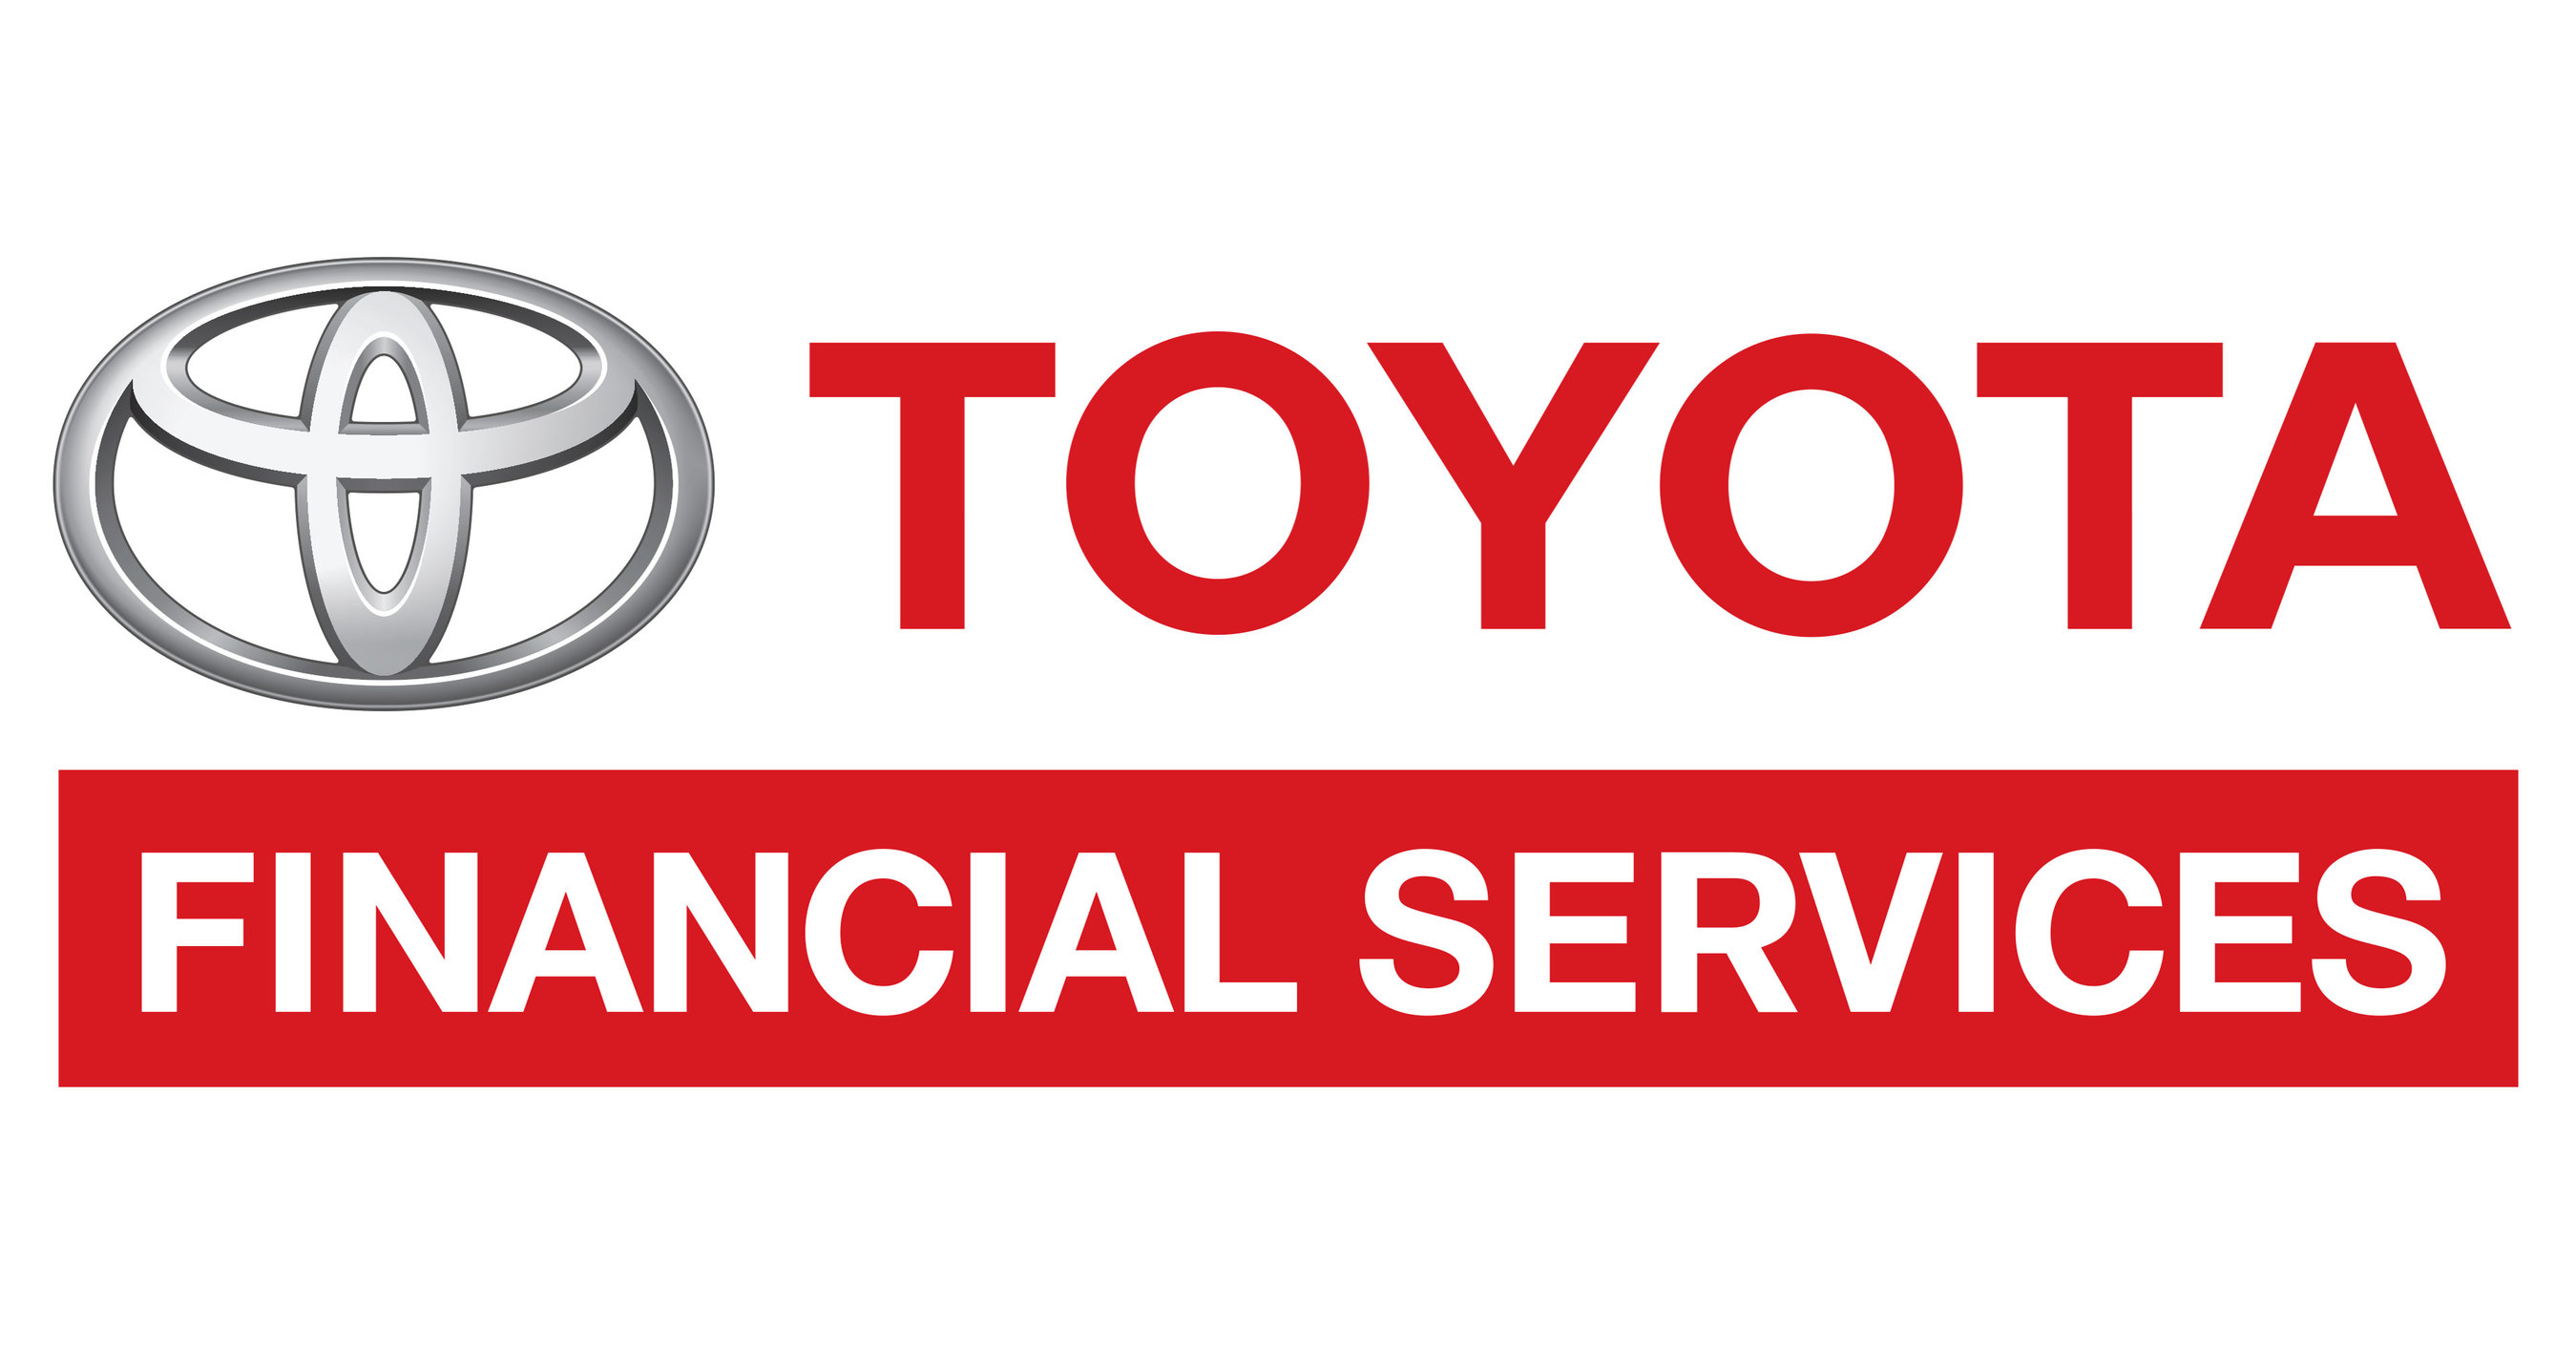 Toyota financial website investing on the stock market for beginners